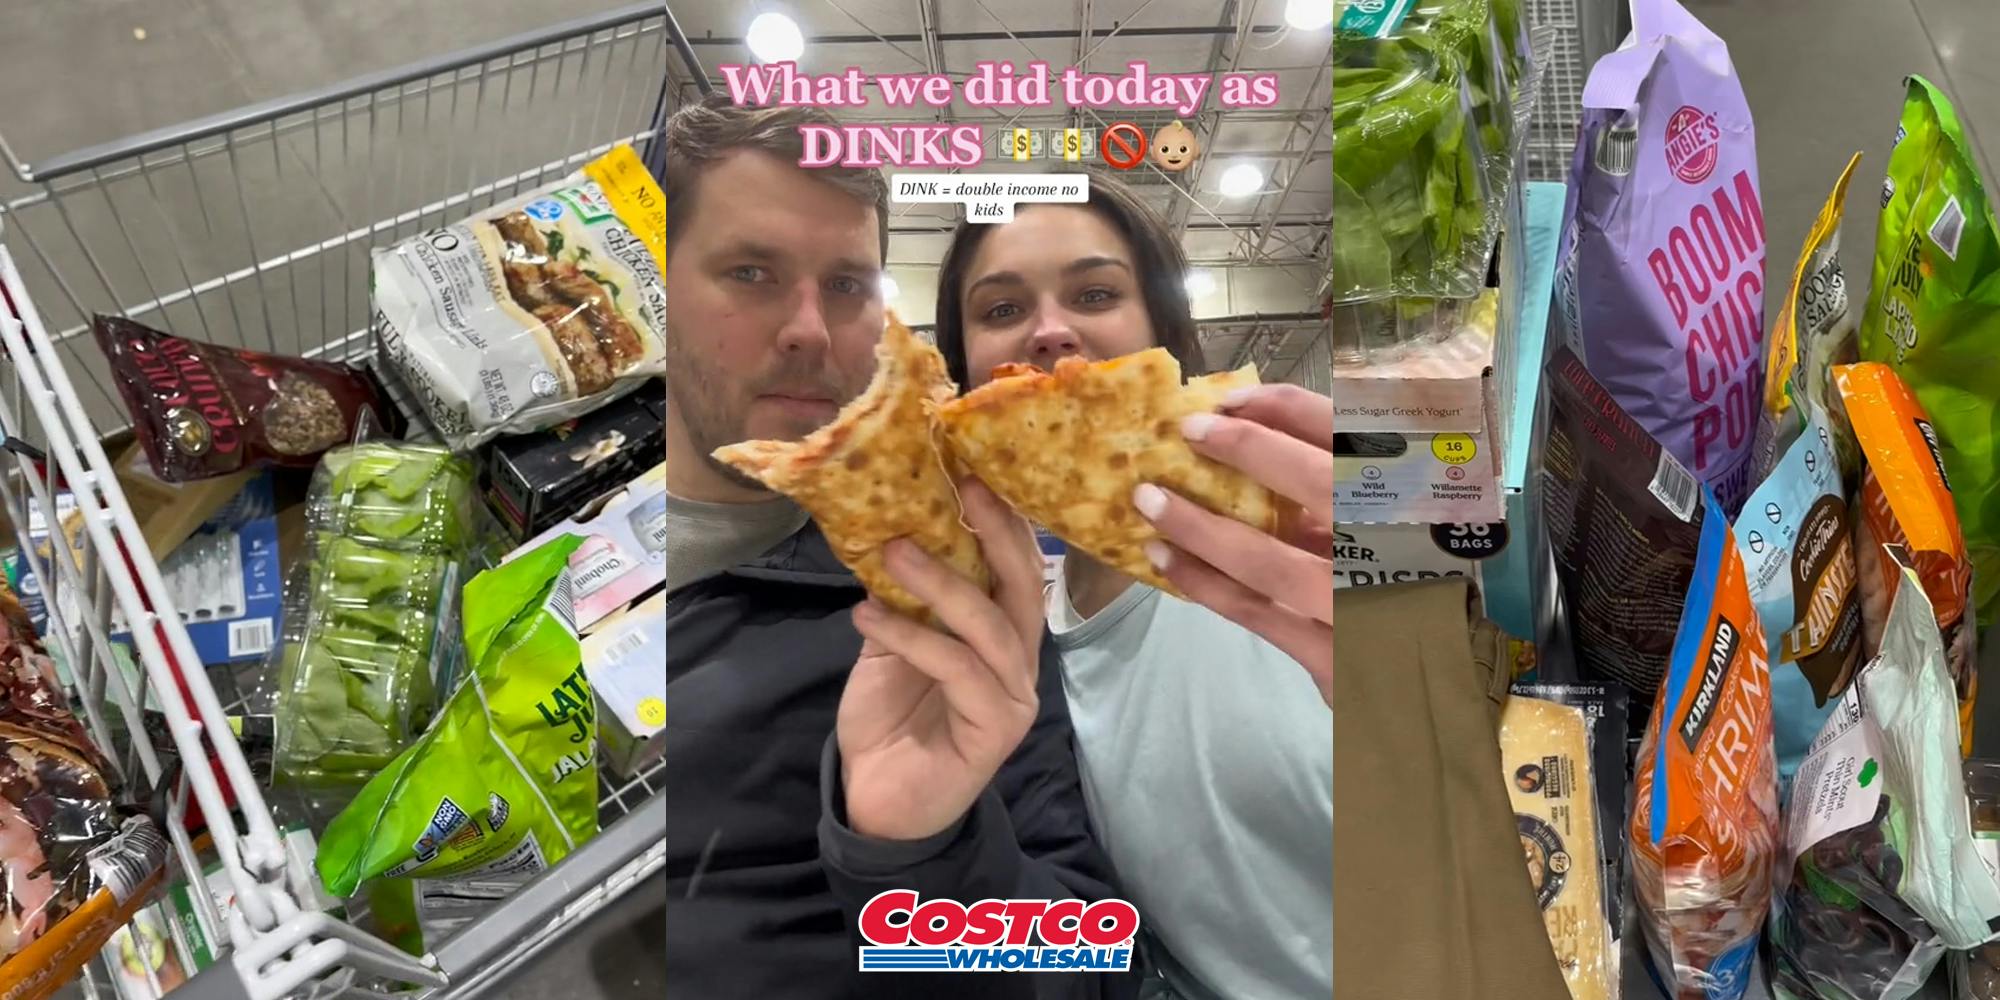 cart full of groceries at Costco (l) couple dinking pizza slices together with caption "What we did today as DINKS" with Costco logo at bottom (c) Costco groceries at register (r)